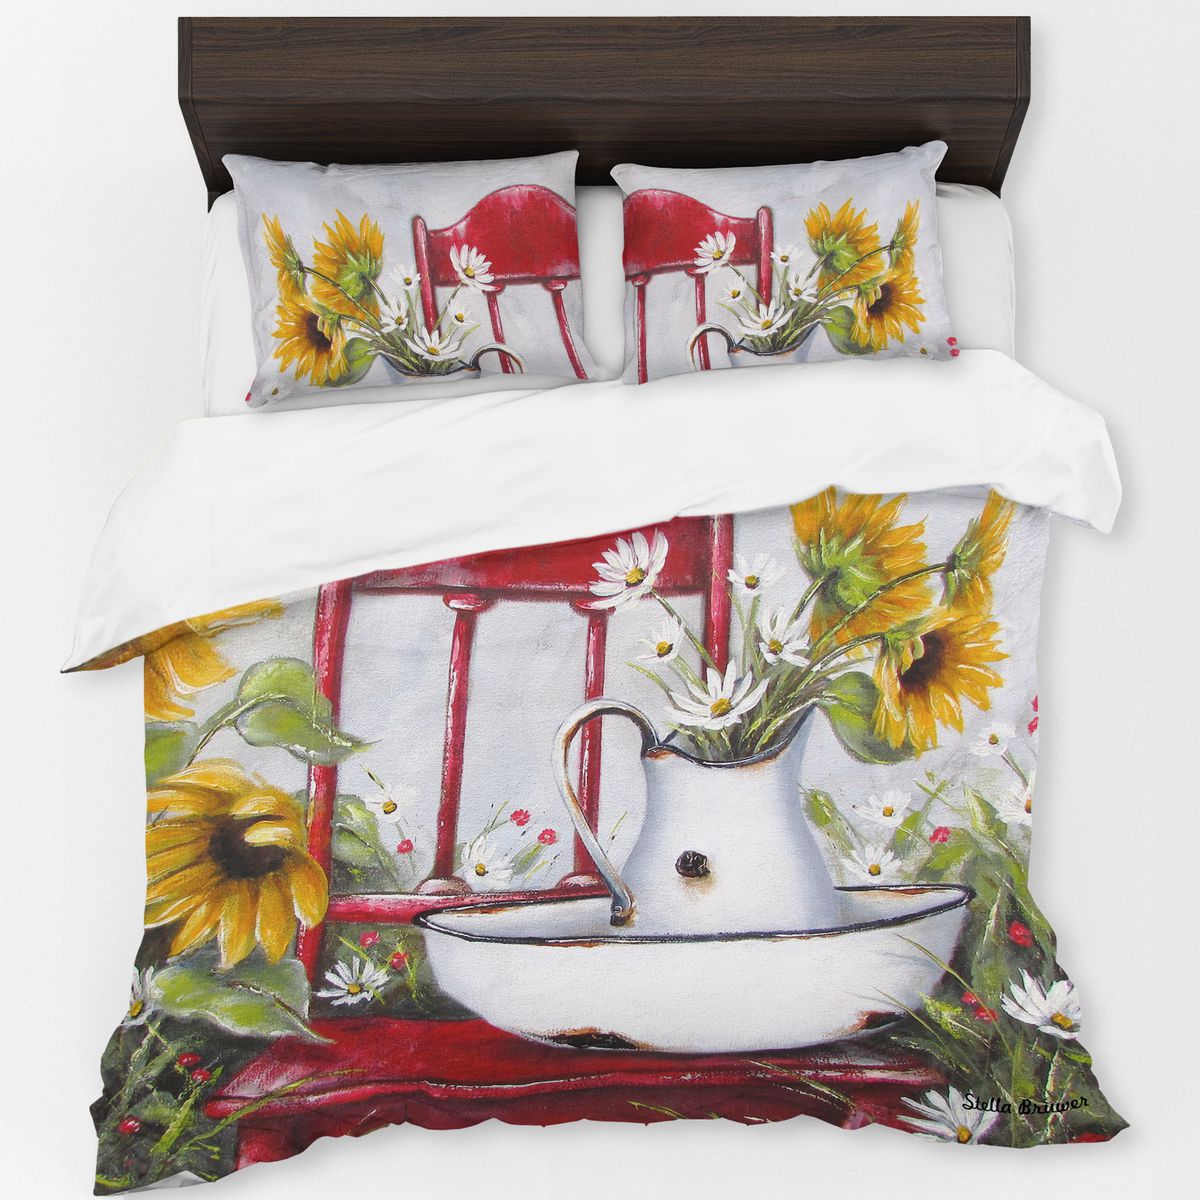 Red Chair and Sunflowers By Stella Bruwer Duvet Cover Set